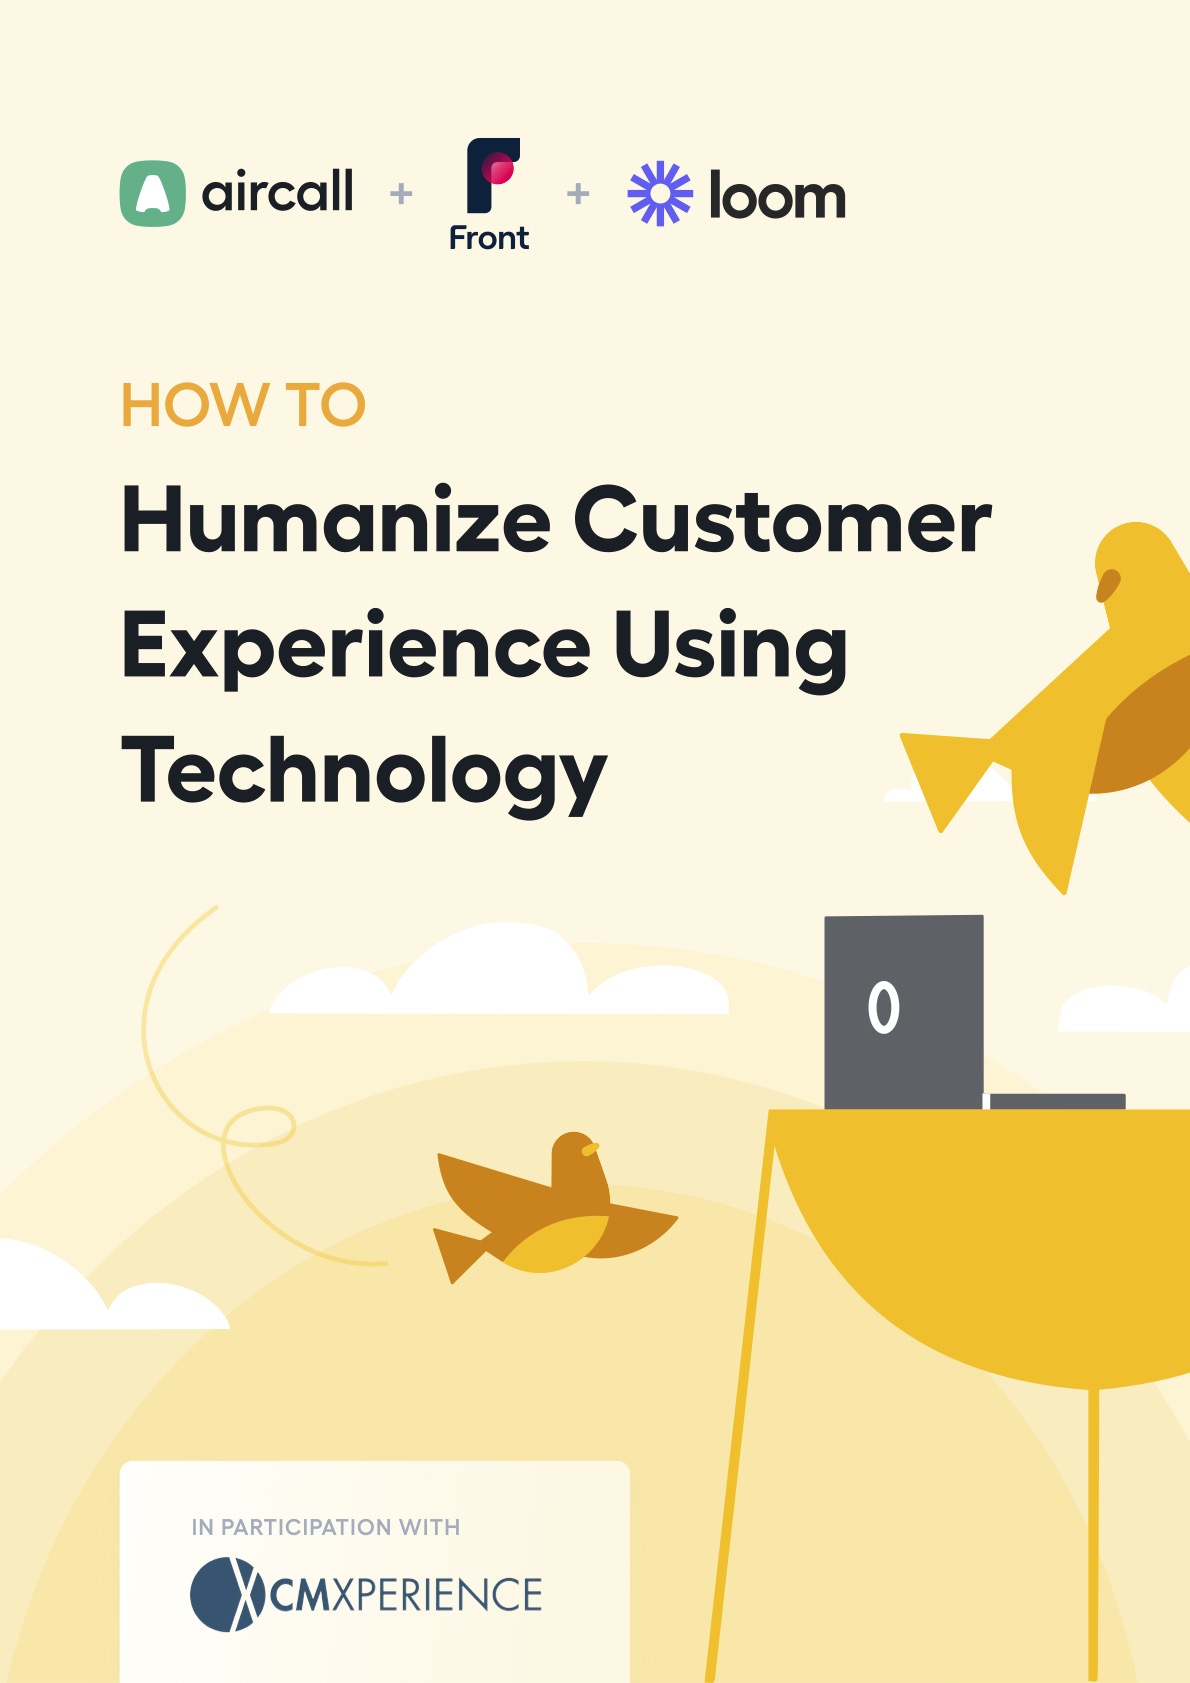 How to Humanize the Customer Experience Using Technology